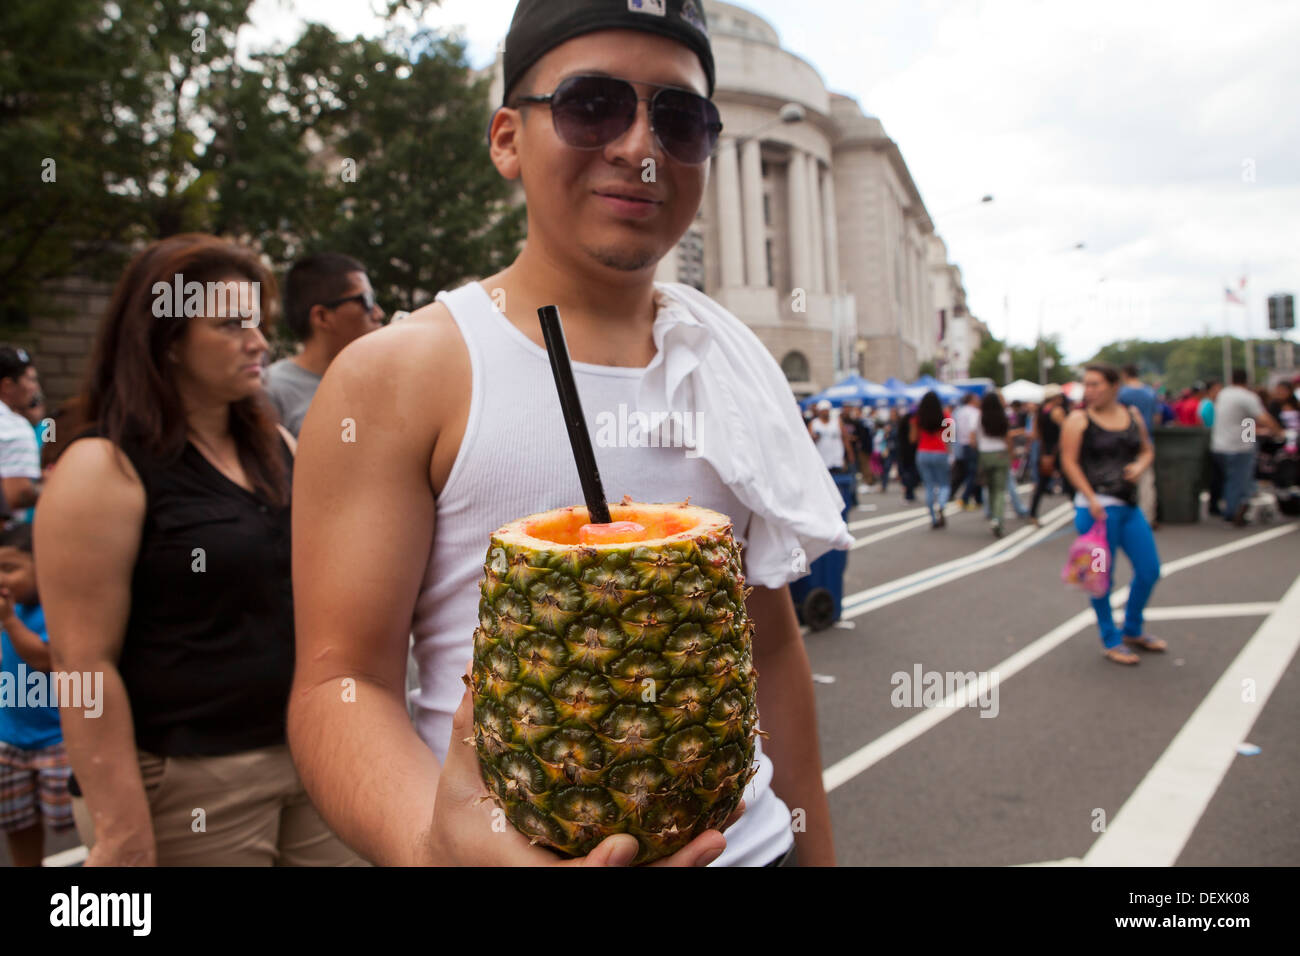 Man holding up a Piña Colada cocktail in pineapple at outdoor festival - USA Stock Photo